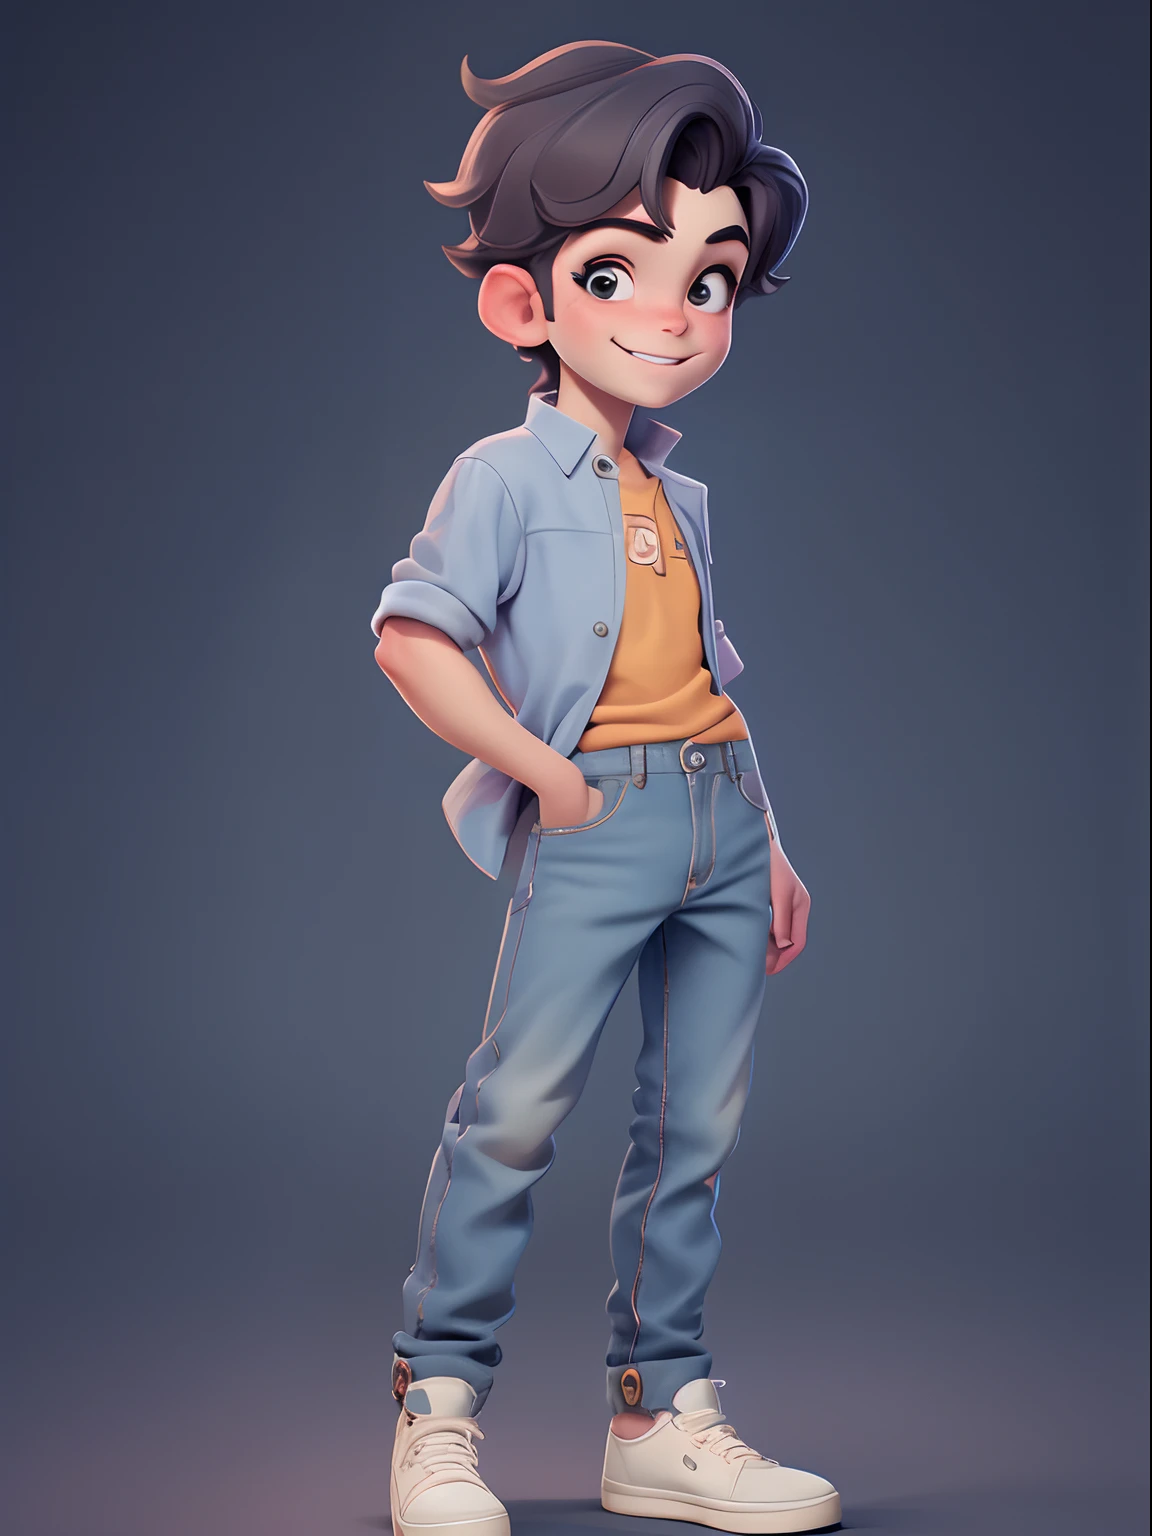 masterpiece, best quality, a (((boy))) smiling stand up, jeans, polo shirt, young, a youthful boy, full body